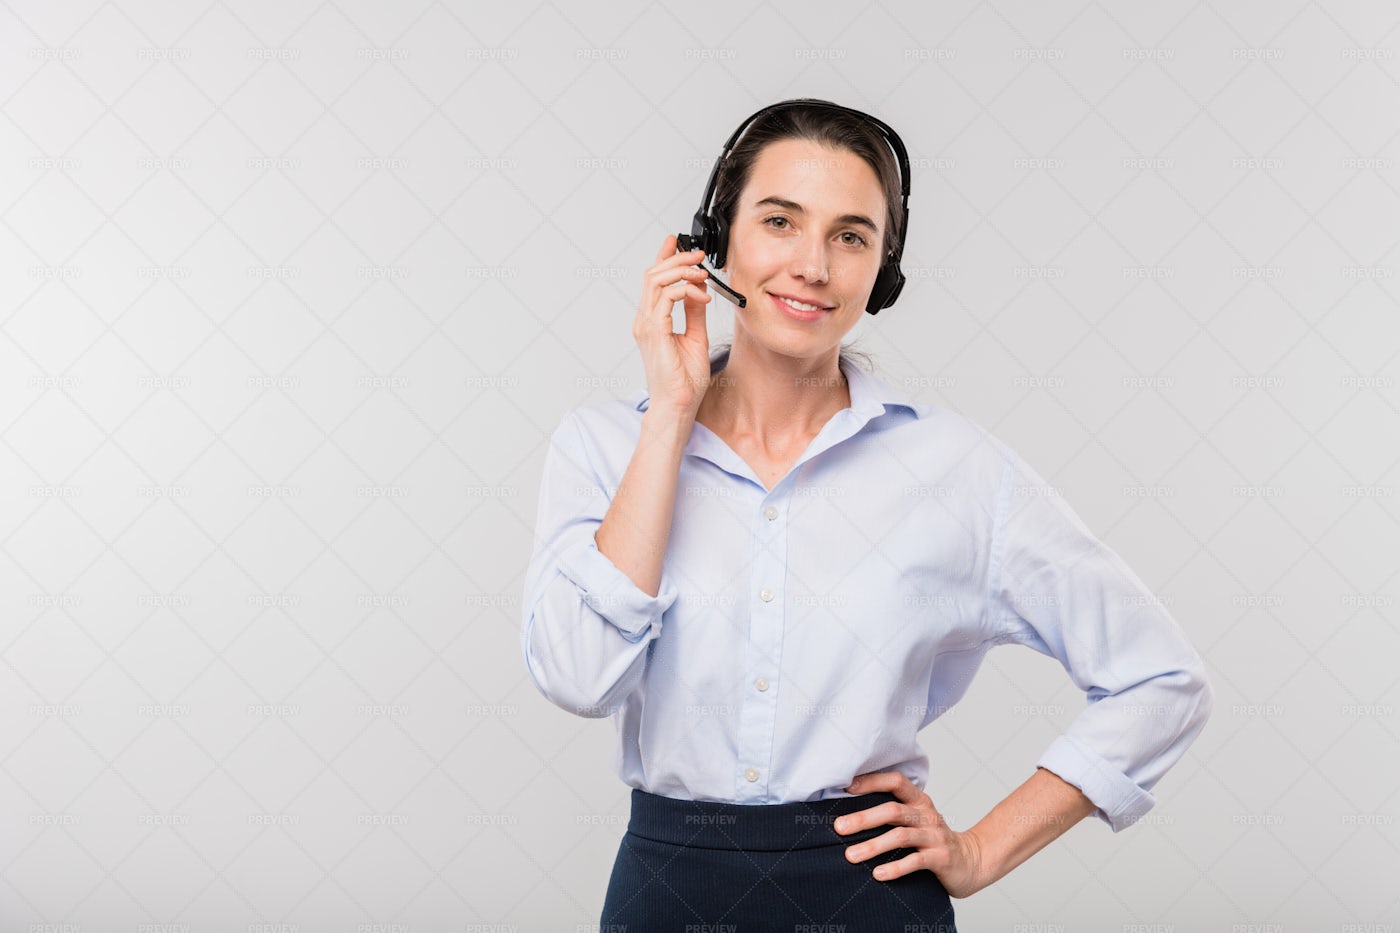 Young Smiling Businesswoman In...: Stock Photos